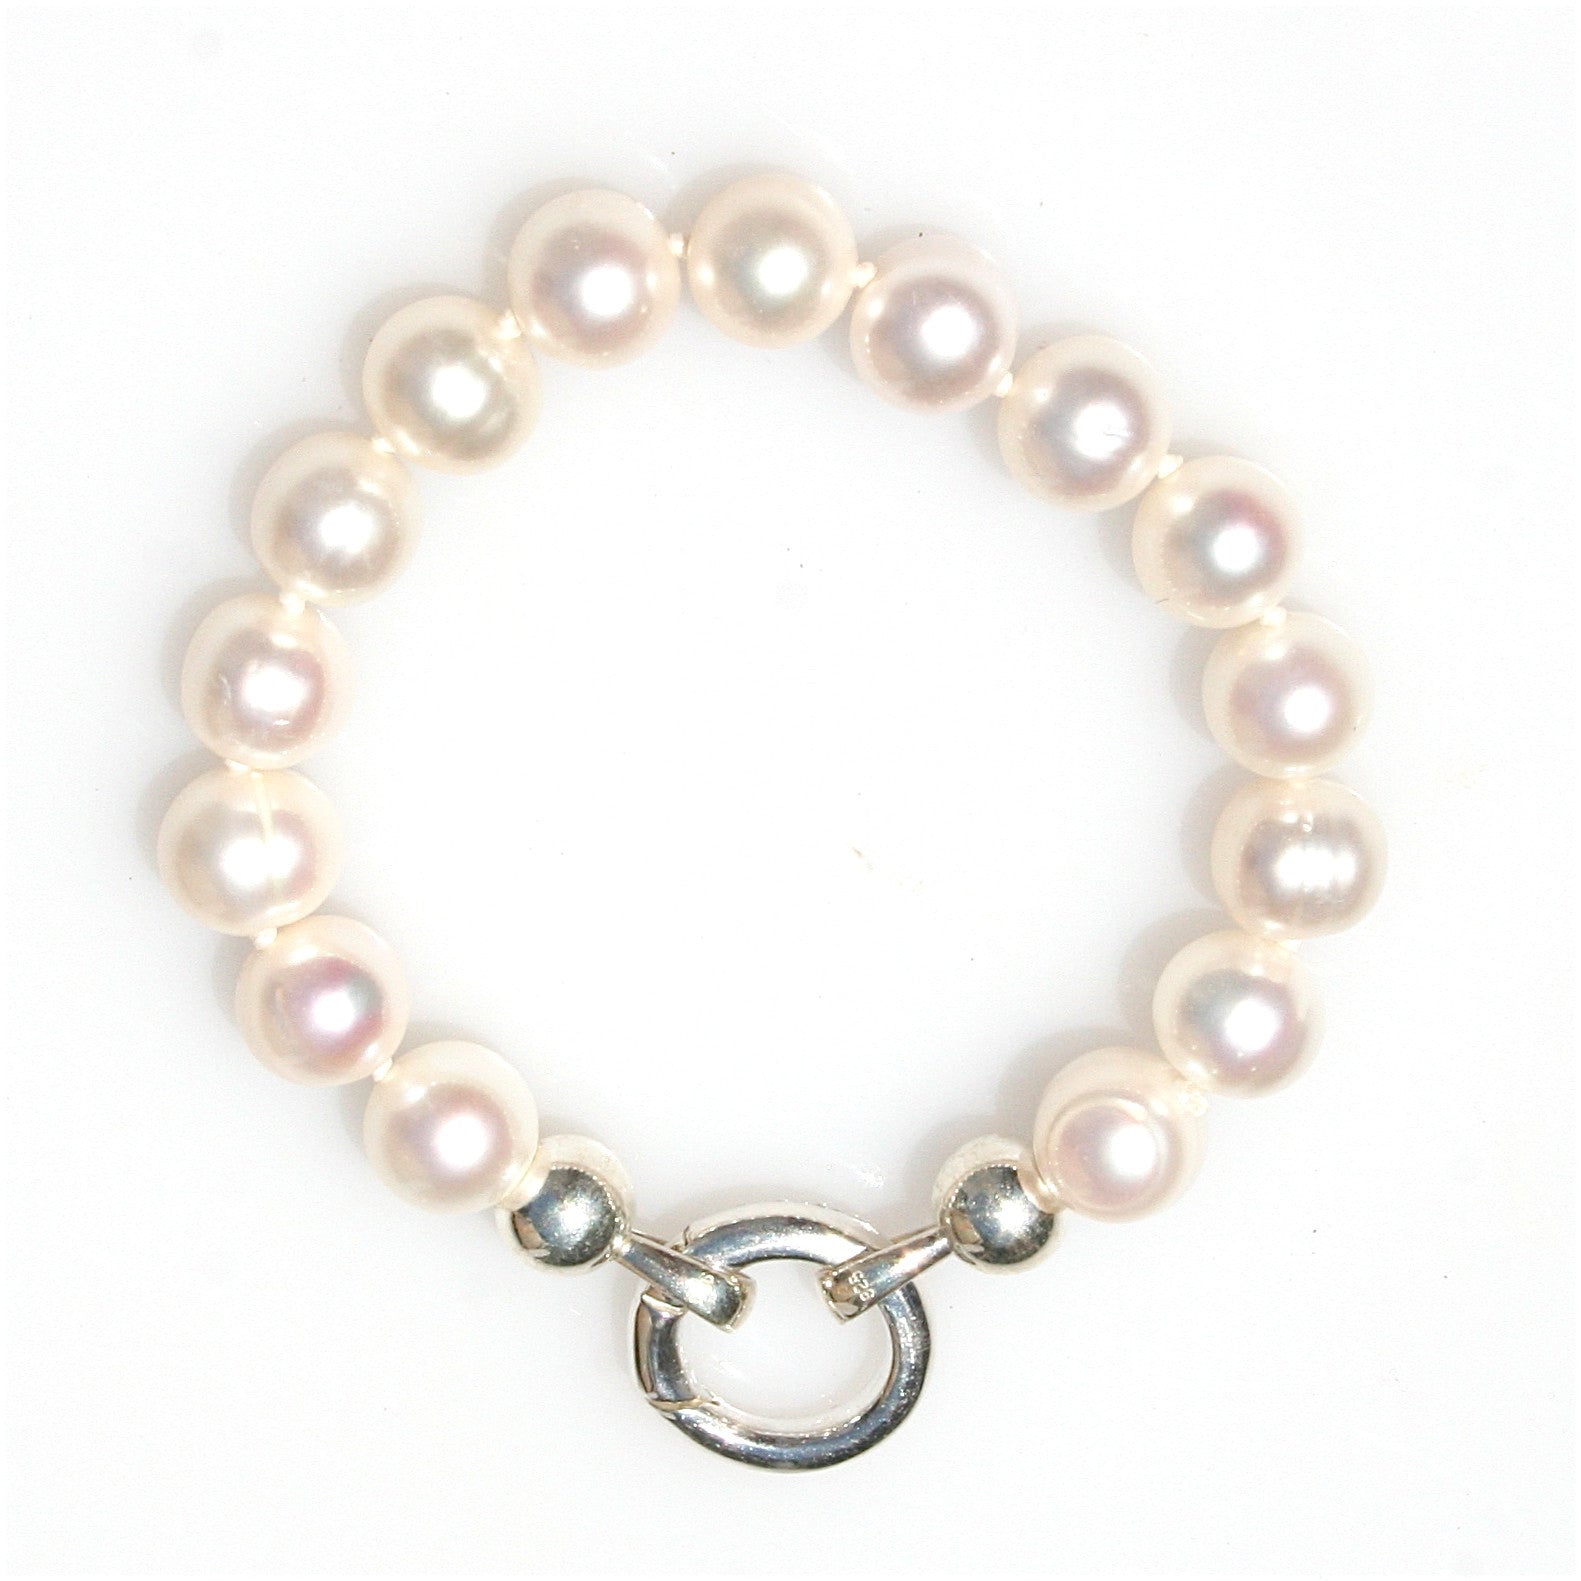 PEARL KNOTTED BRACELET WITH STERLING SILVER CLASP